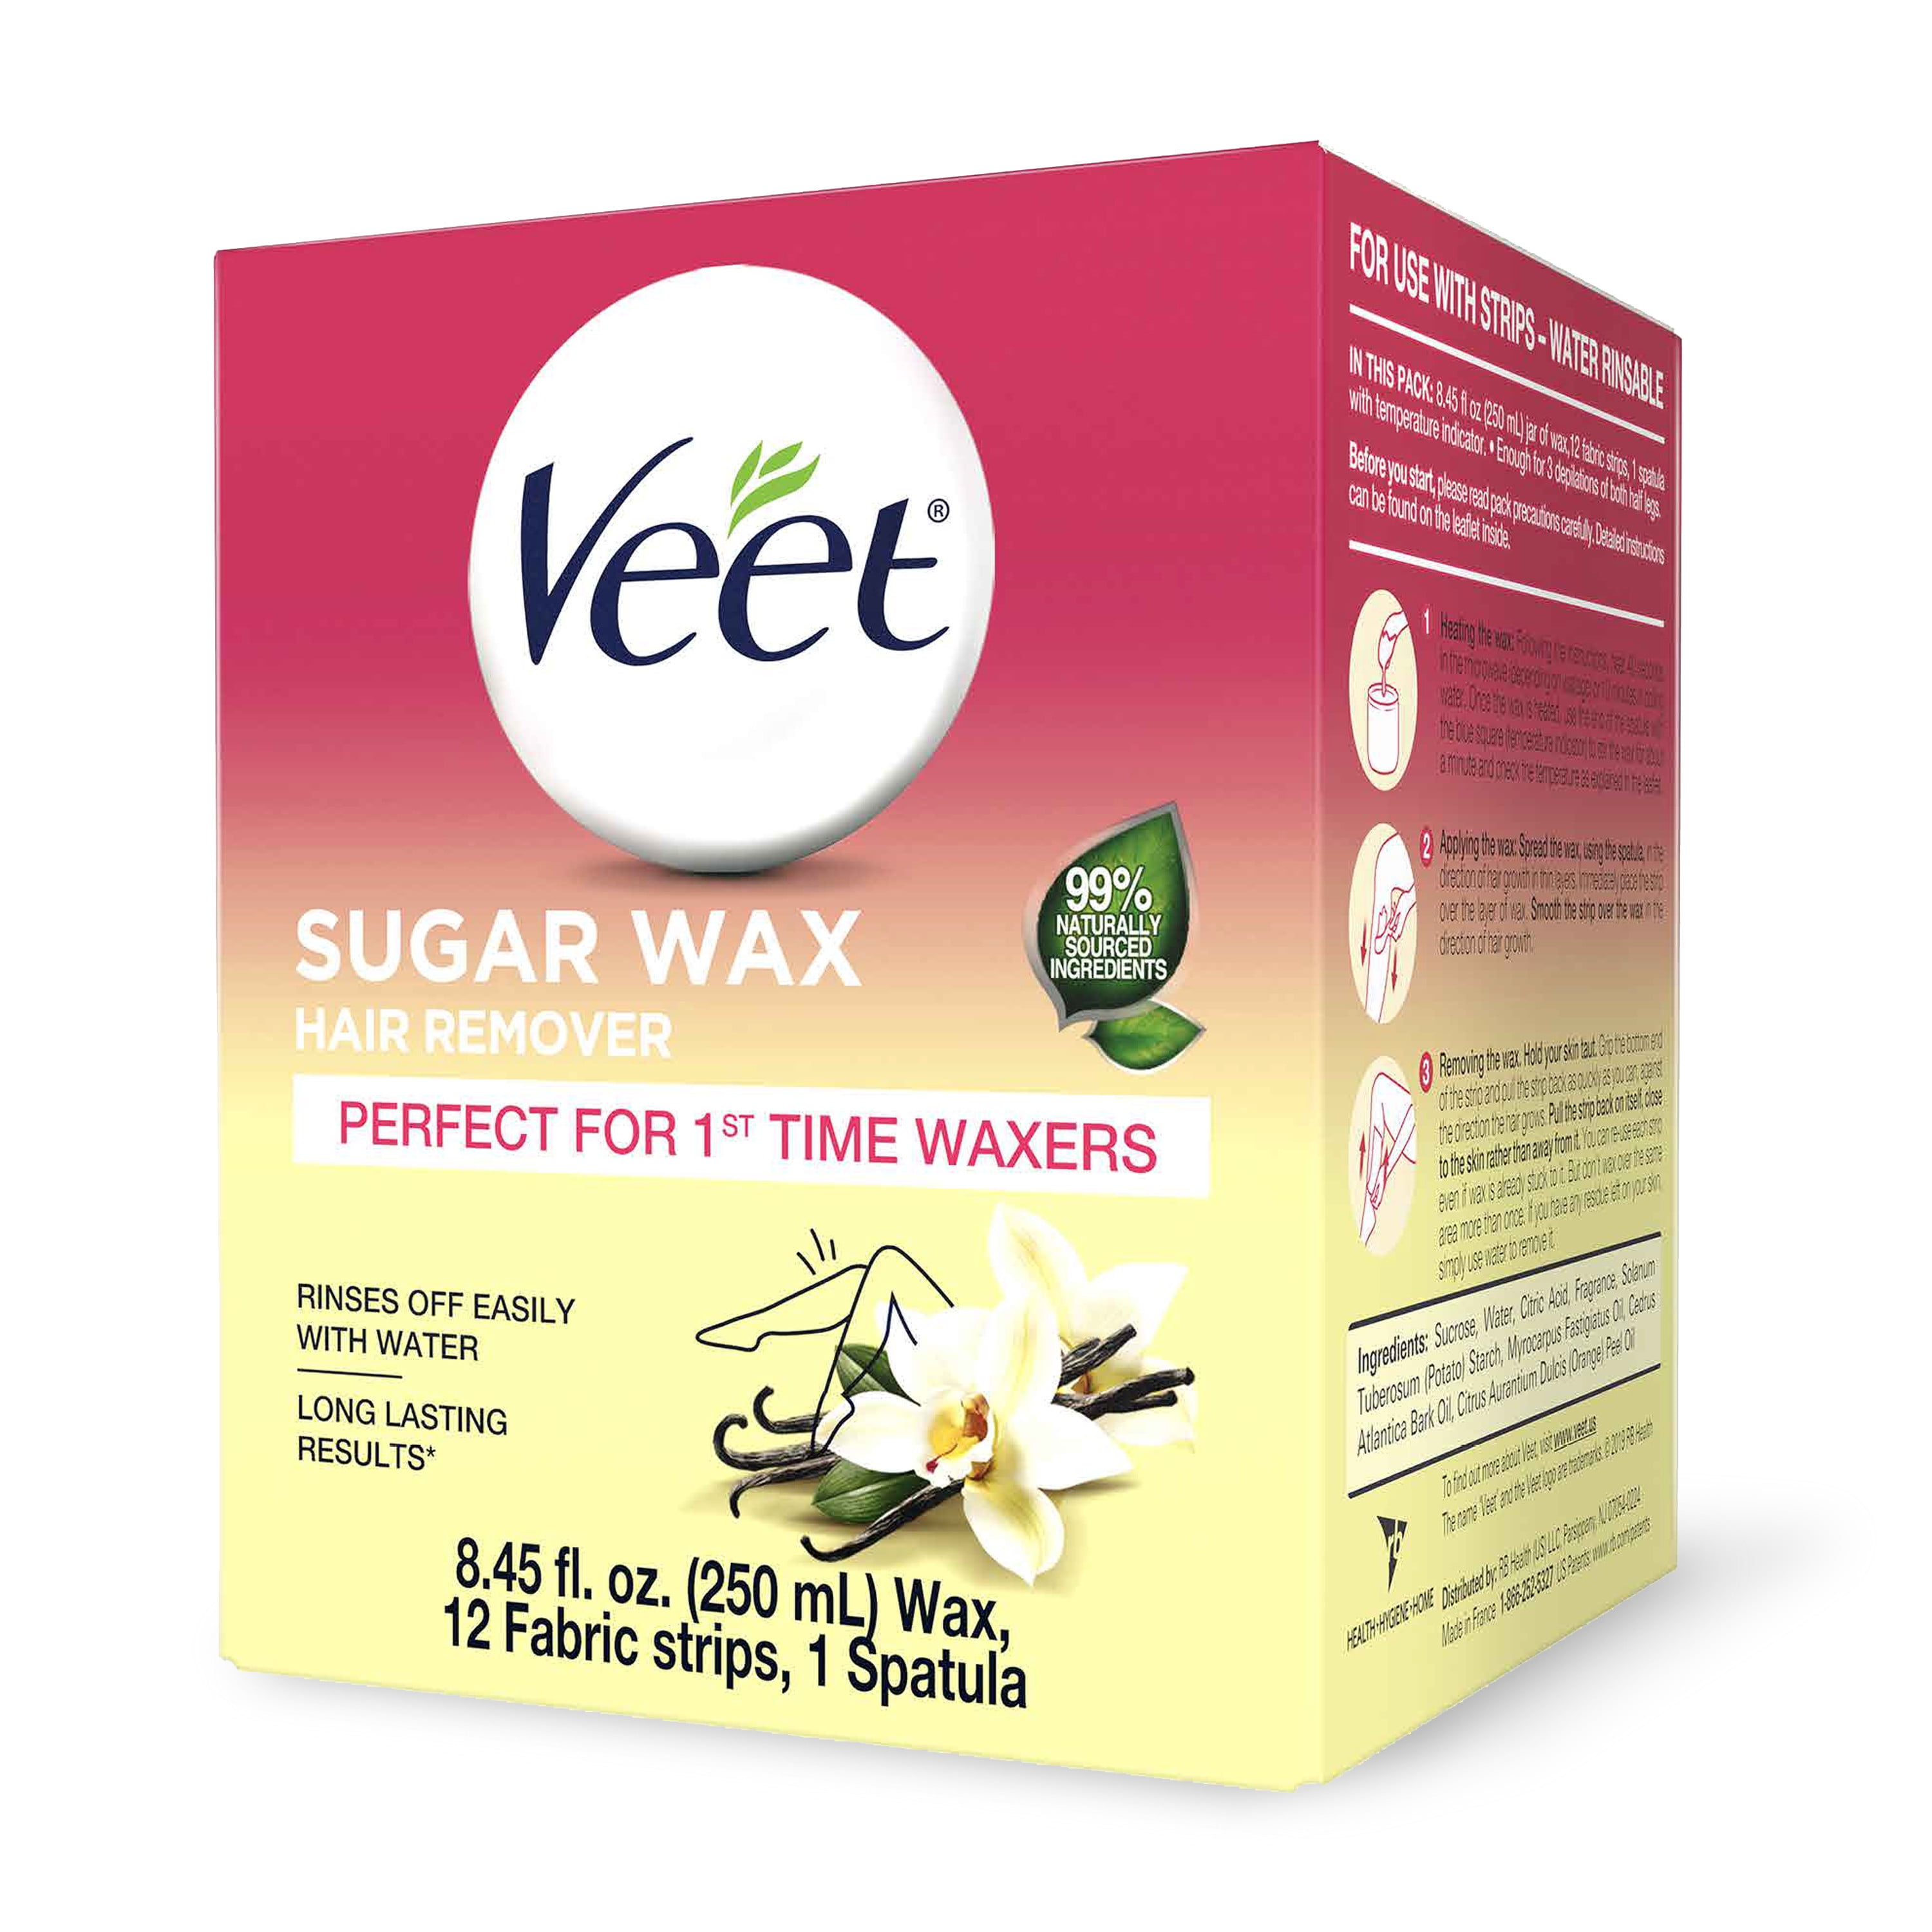 Hair Removal Wax- VEET Sugar Wax, Hair Remover Waxing Kit with Essential  Oils and Floral Vanilla Fragrance, 250ml Wax and 12 Fabric Strips with 1  Spatula - Walmart.com